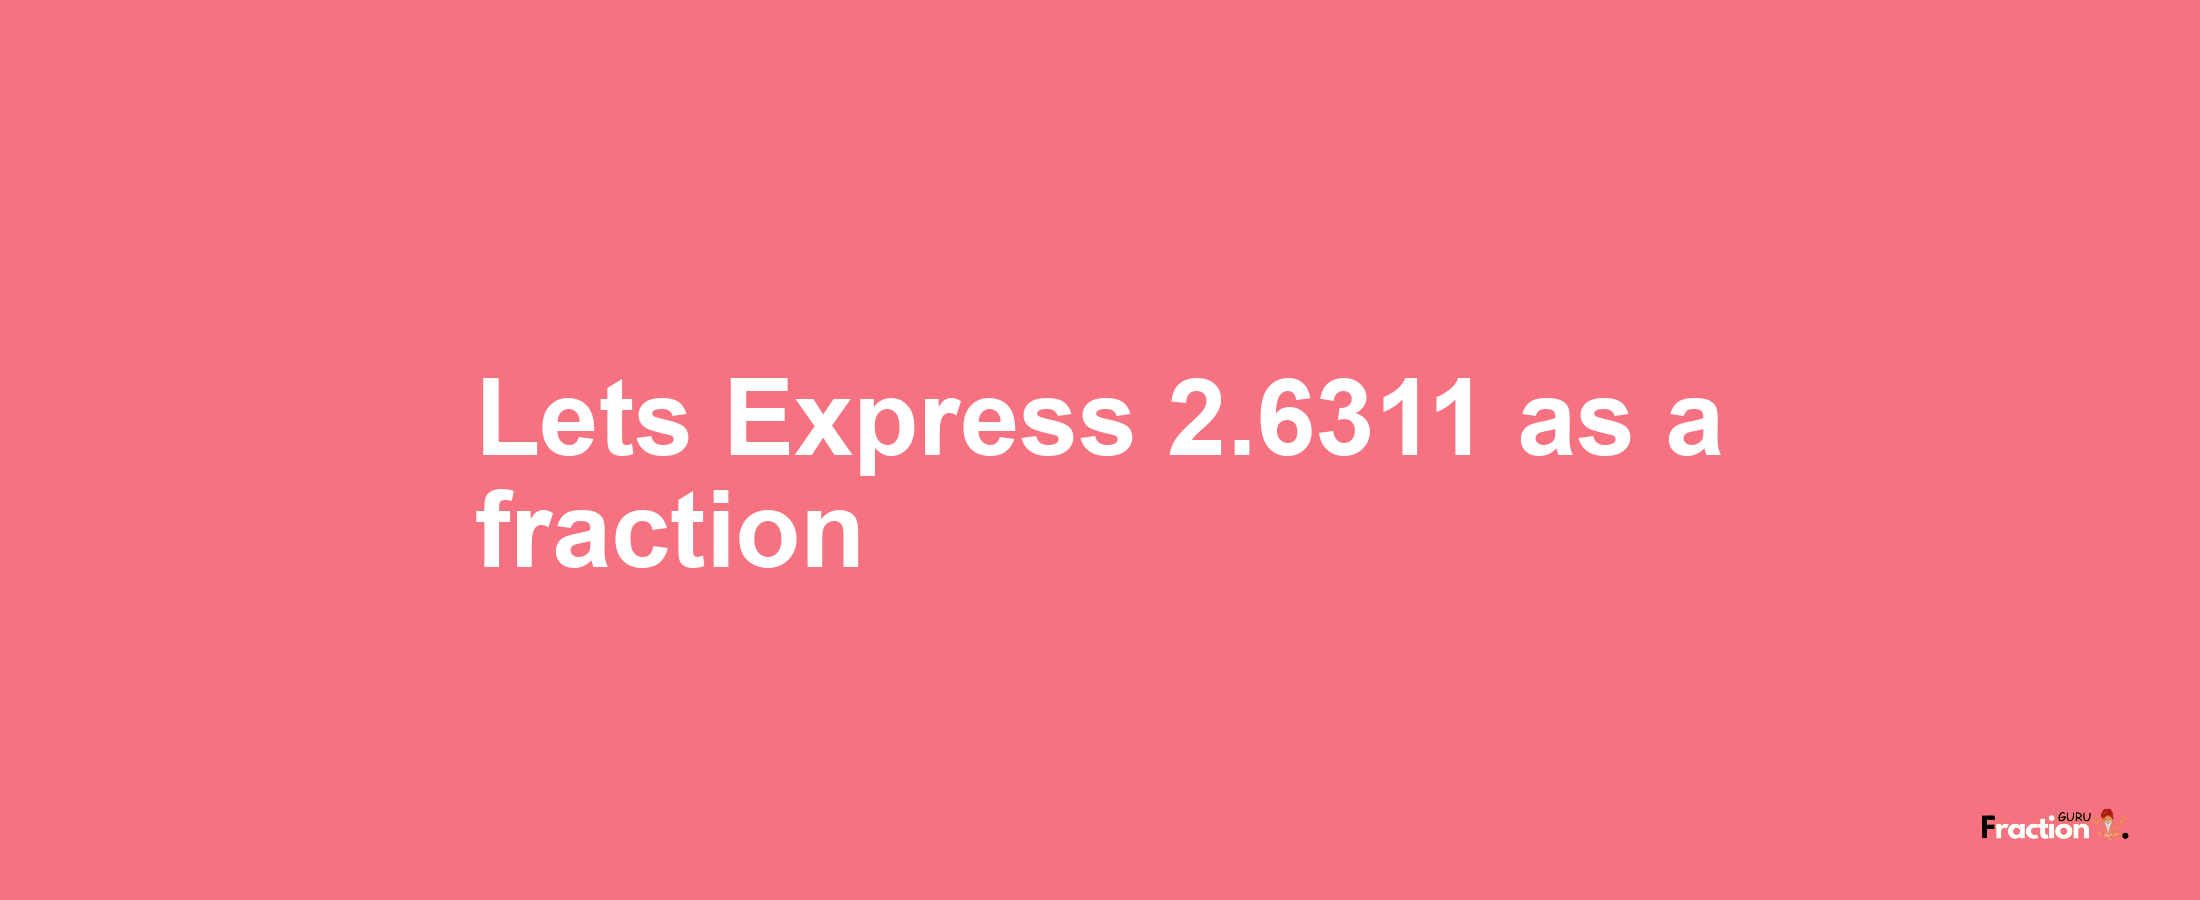 Lets Express 2.6311 as afraction